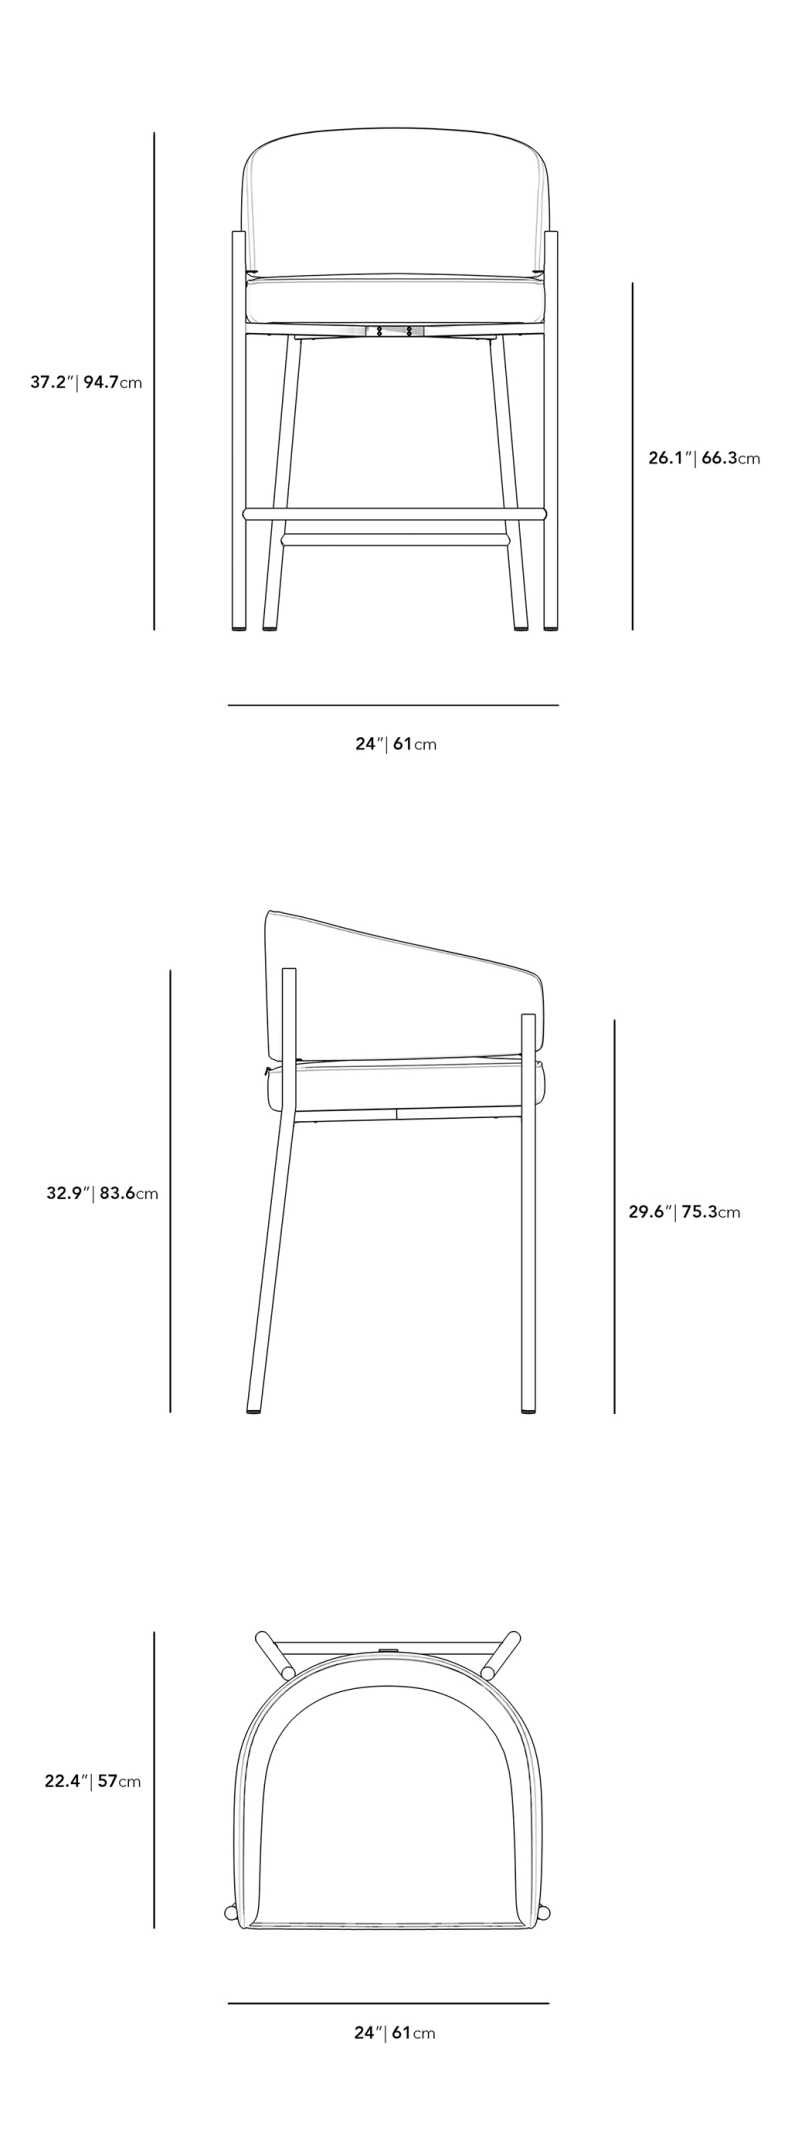 Dimensions for Solana Counter Stool